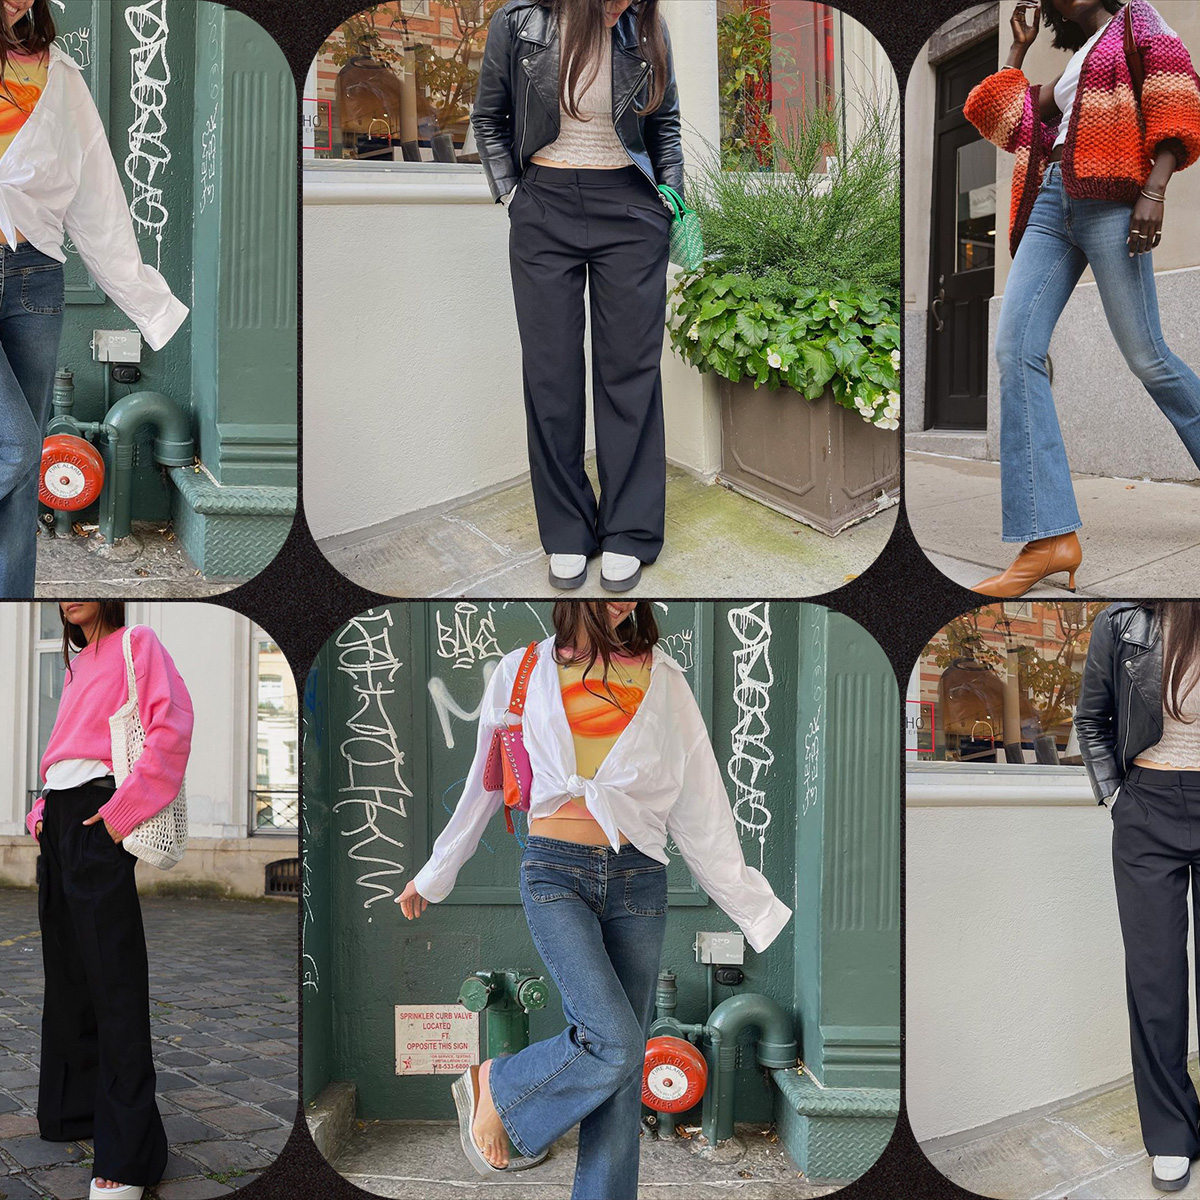 How To Style Guide: Low Rise Jeans - Jean Jail